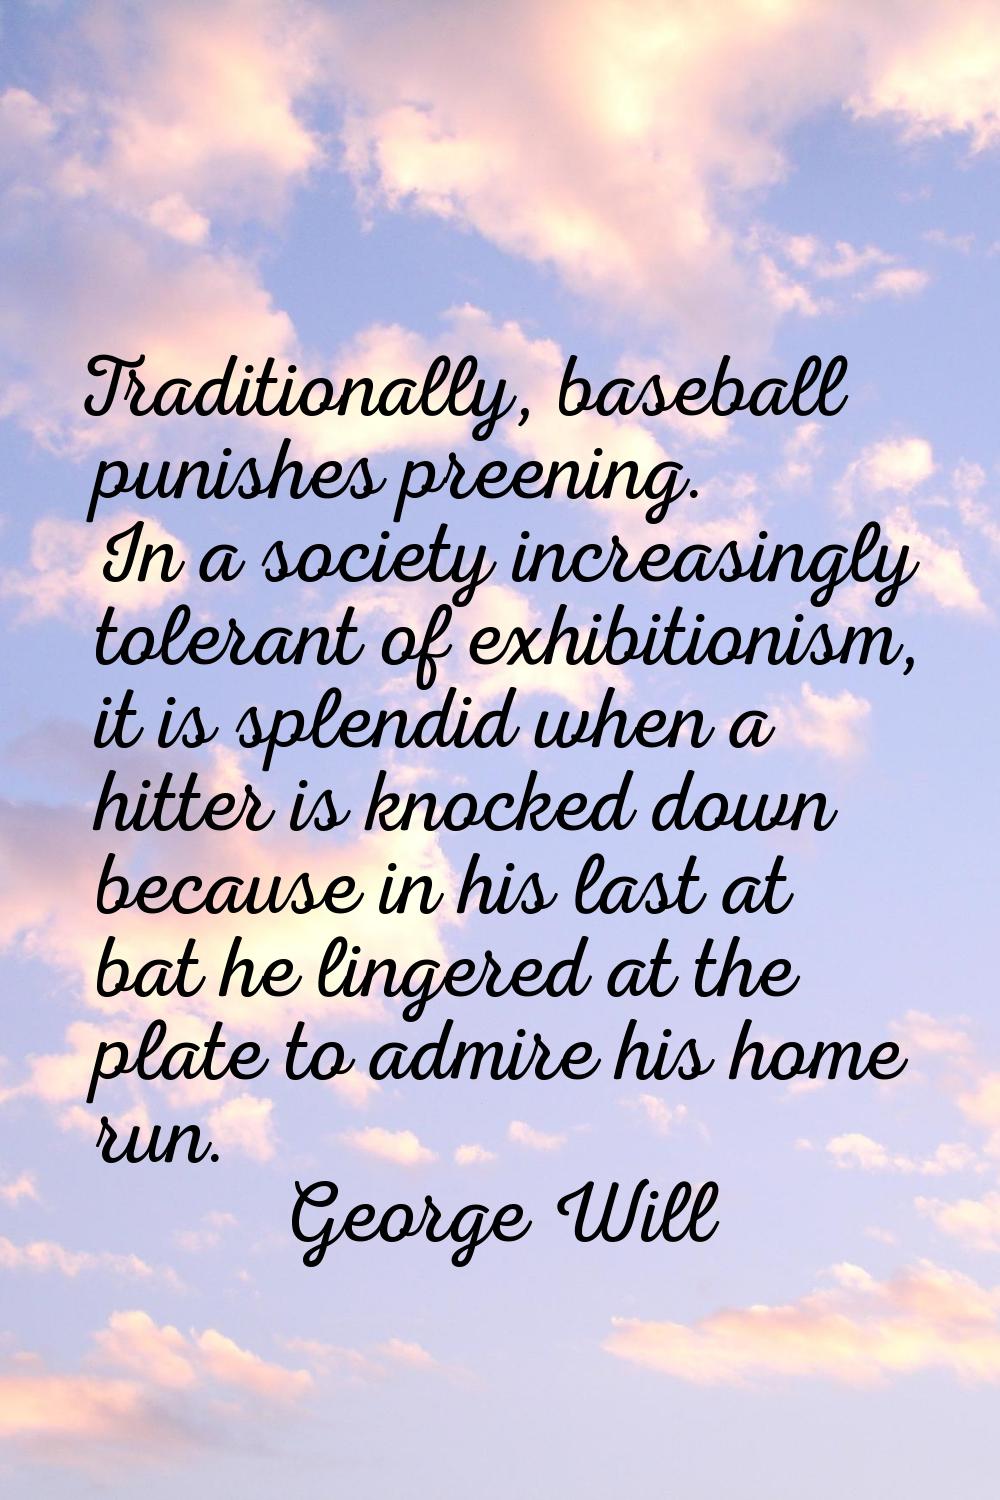 Traditionally, baseball punishes preening. In a society increasingly tolerant of exhibitionism, it 